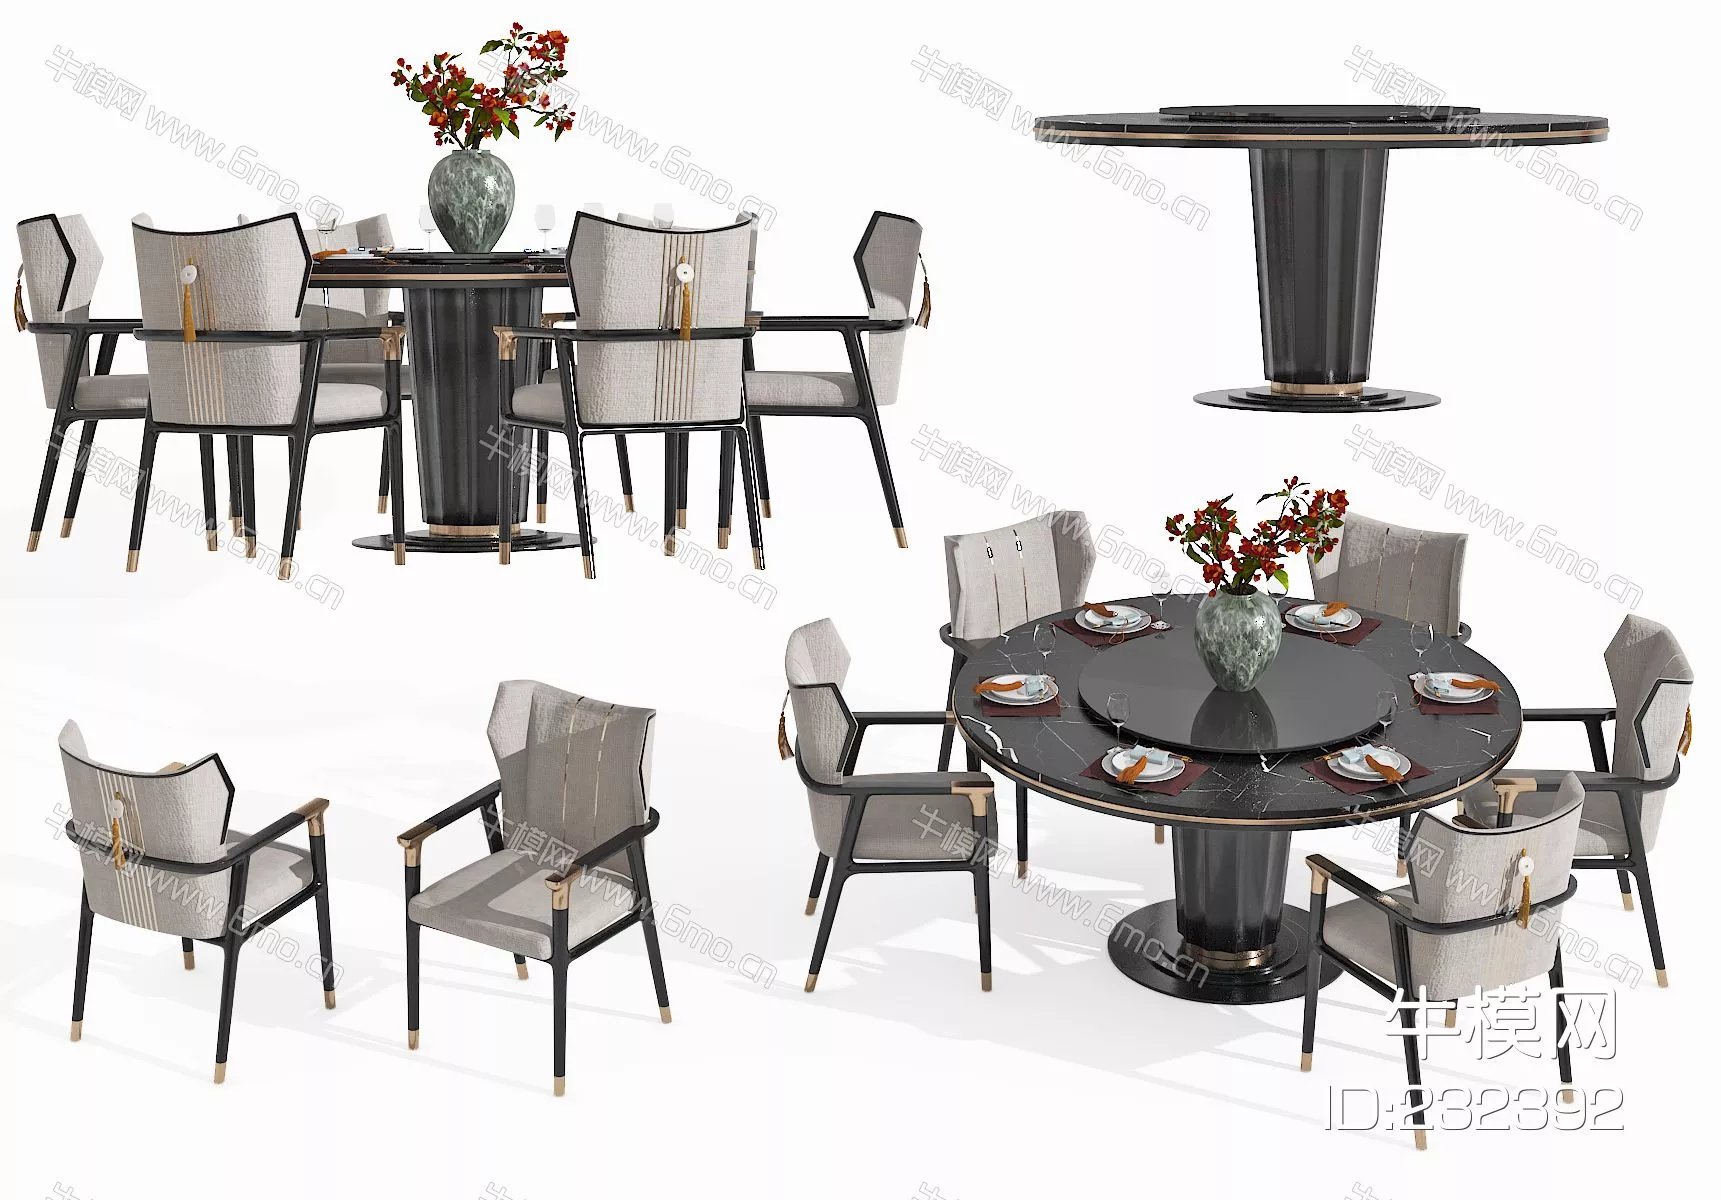 CHINESE DINING TABLE SET - SKETCHUP 3D MODEL - VRAY - 232392